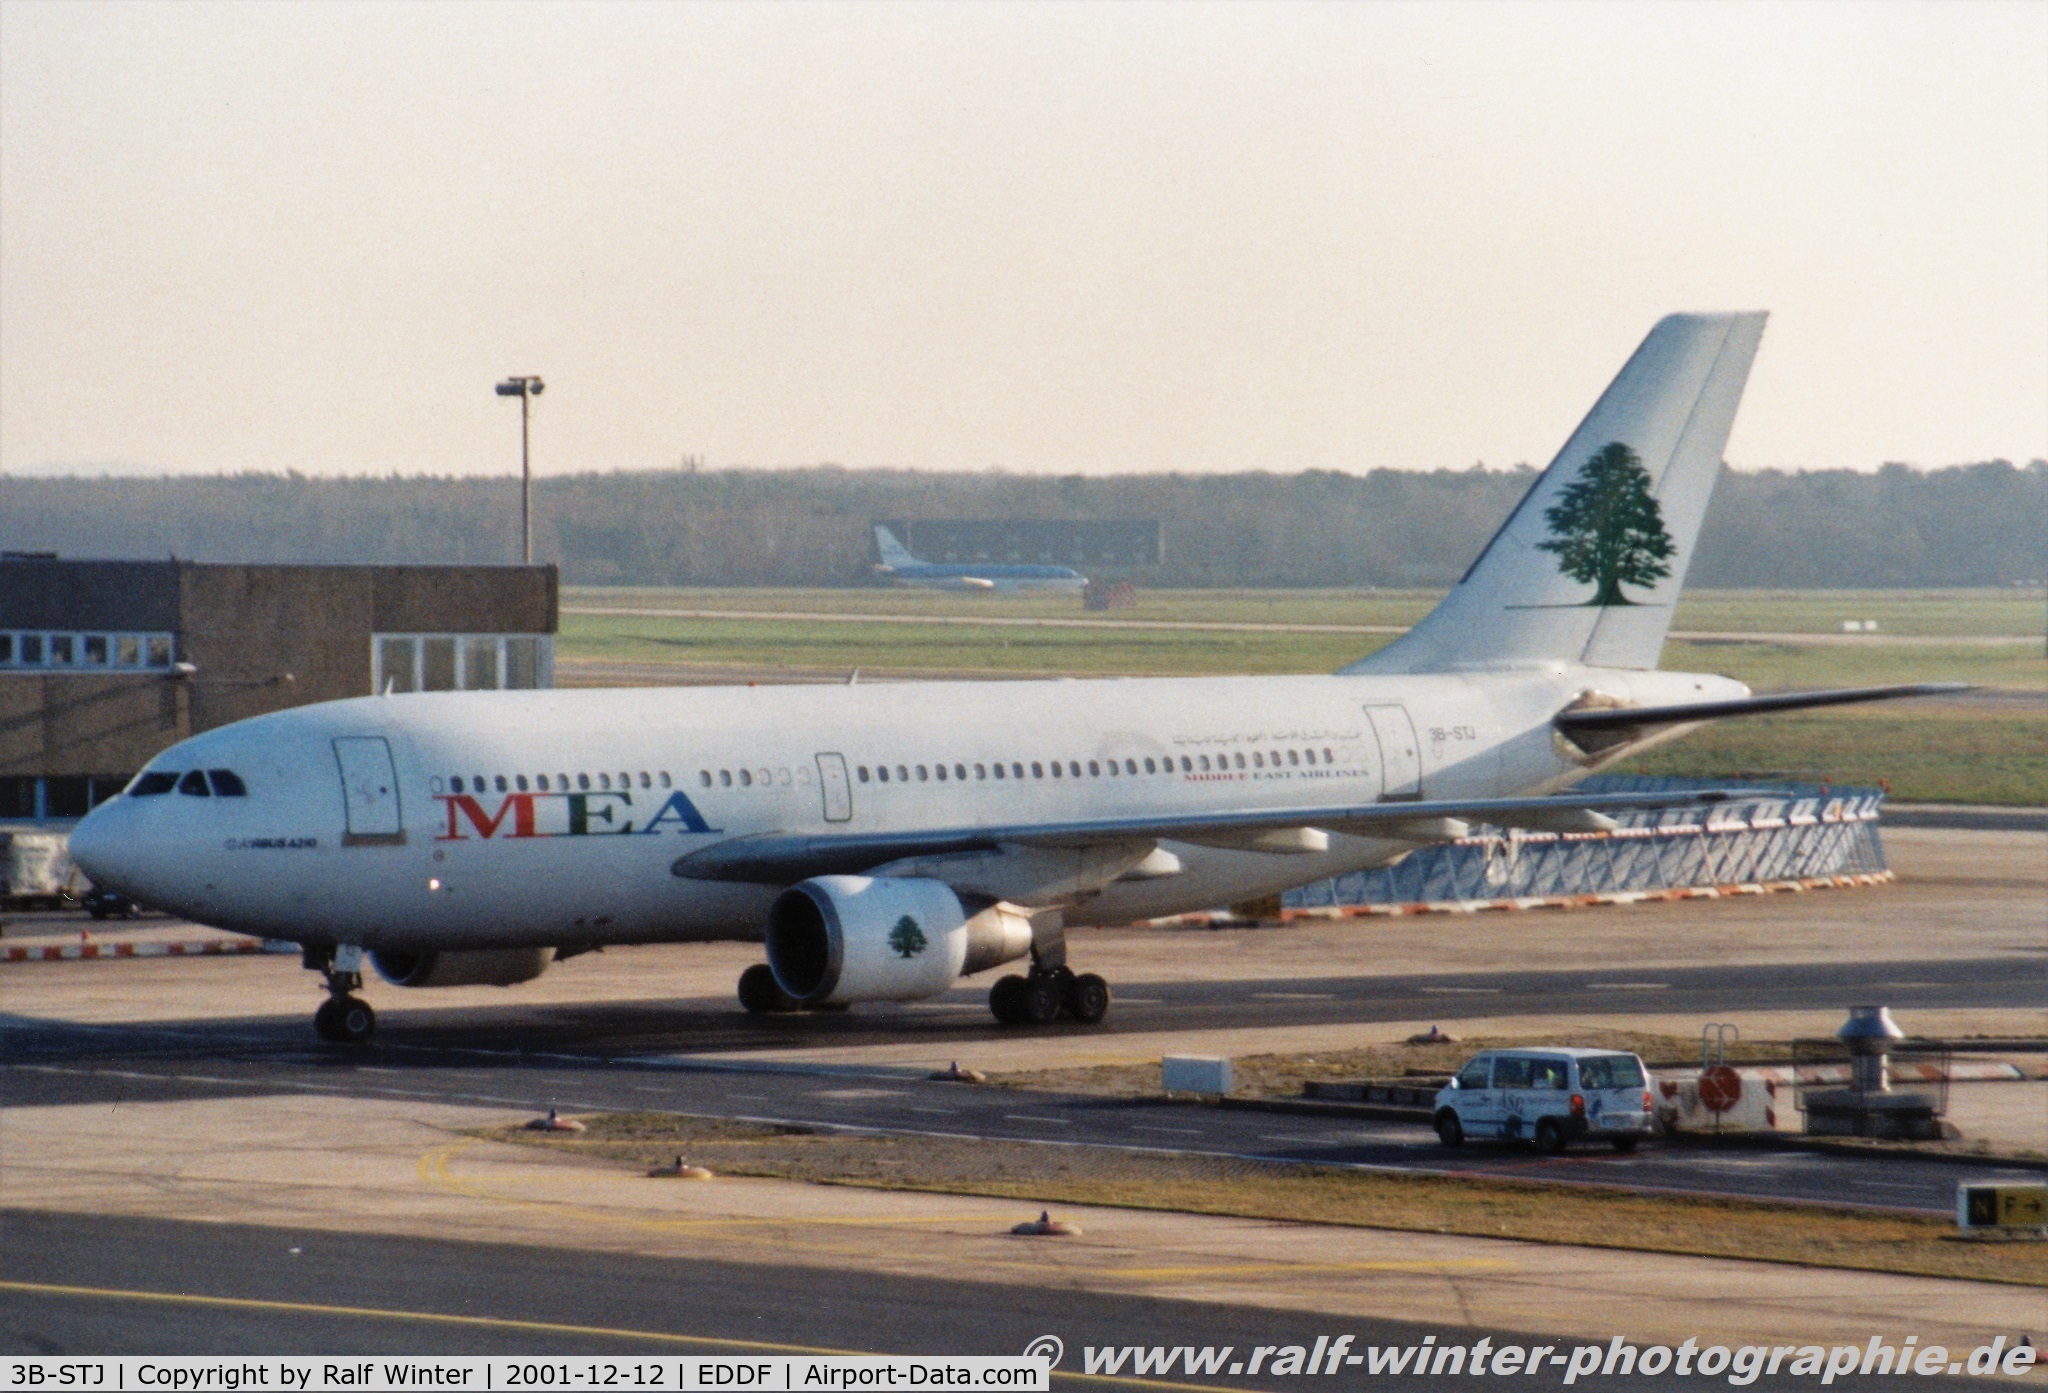 3B-STJ, 1984 Airbus A310-222 C/N 350, Airbus A310-222 - ME MEA Middle East Airlines - 350 - 3B-STJ - 12.2001 - FRA